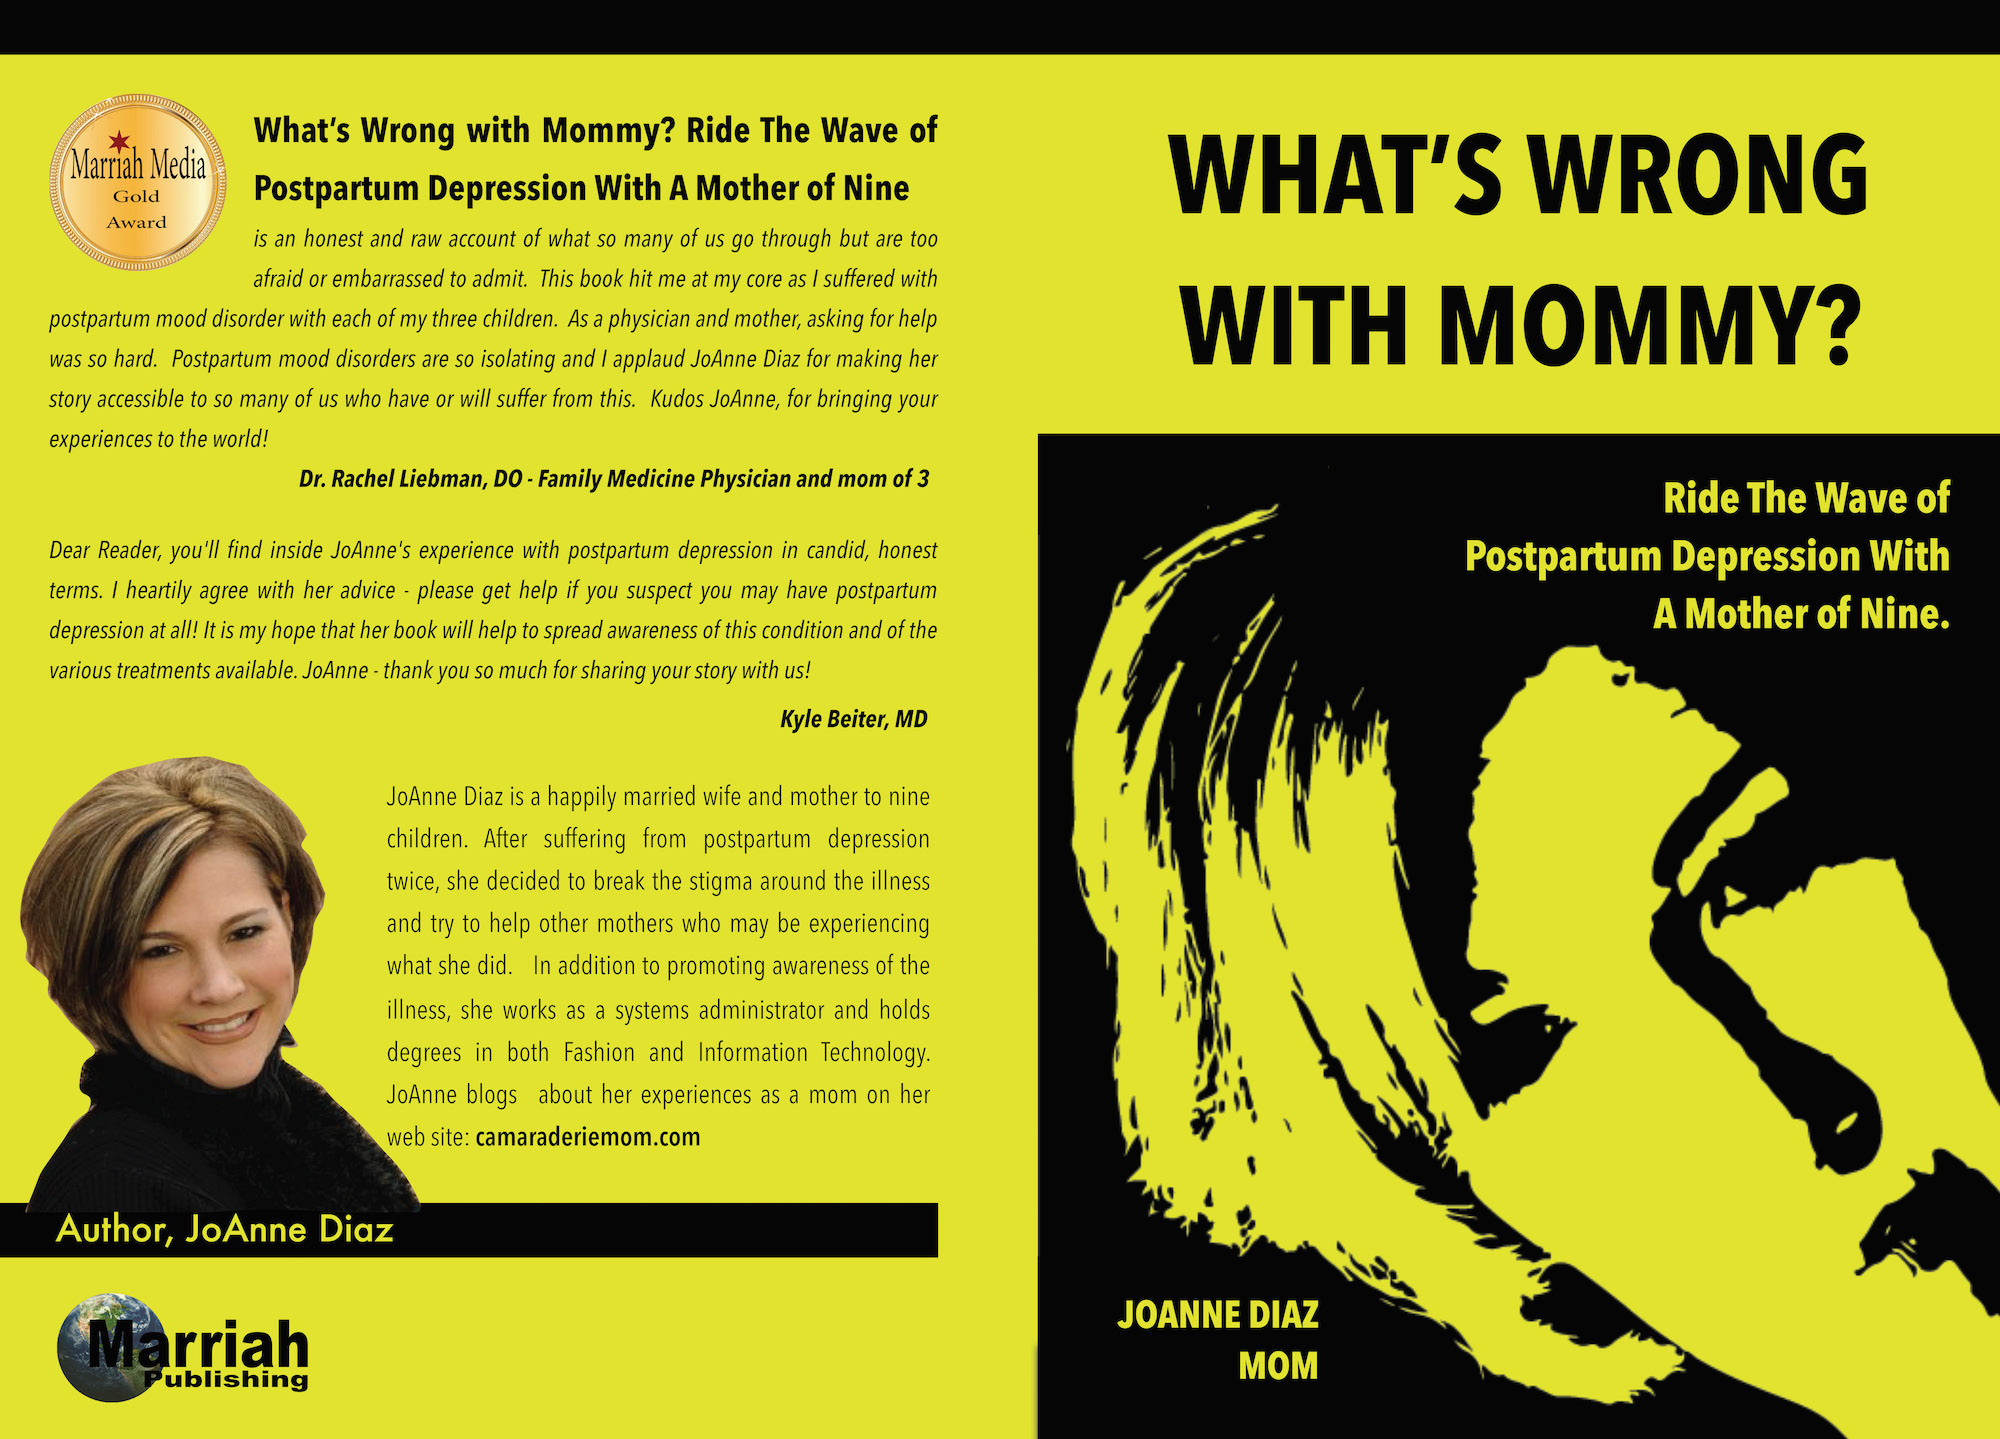 New Book Whats Wrong With Mommy Just Released About Postpartum